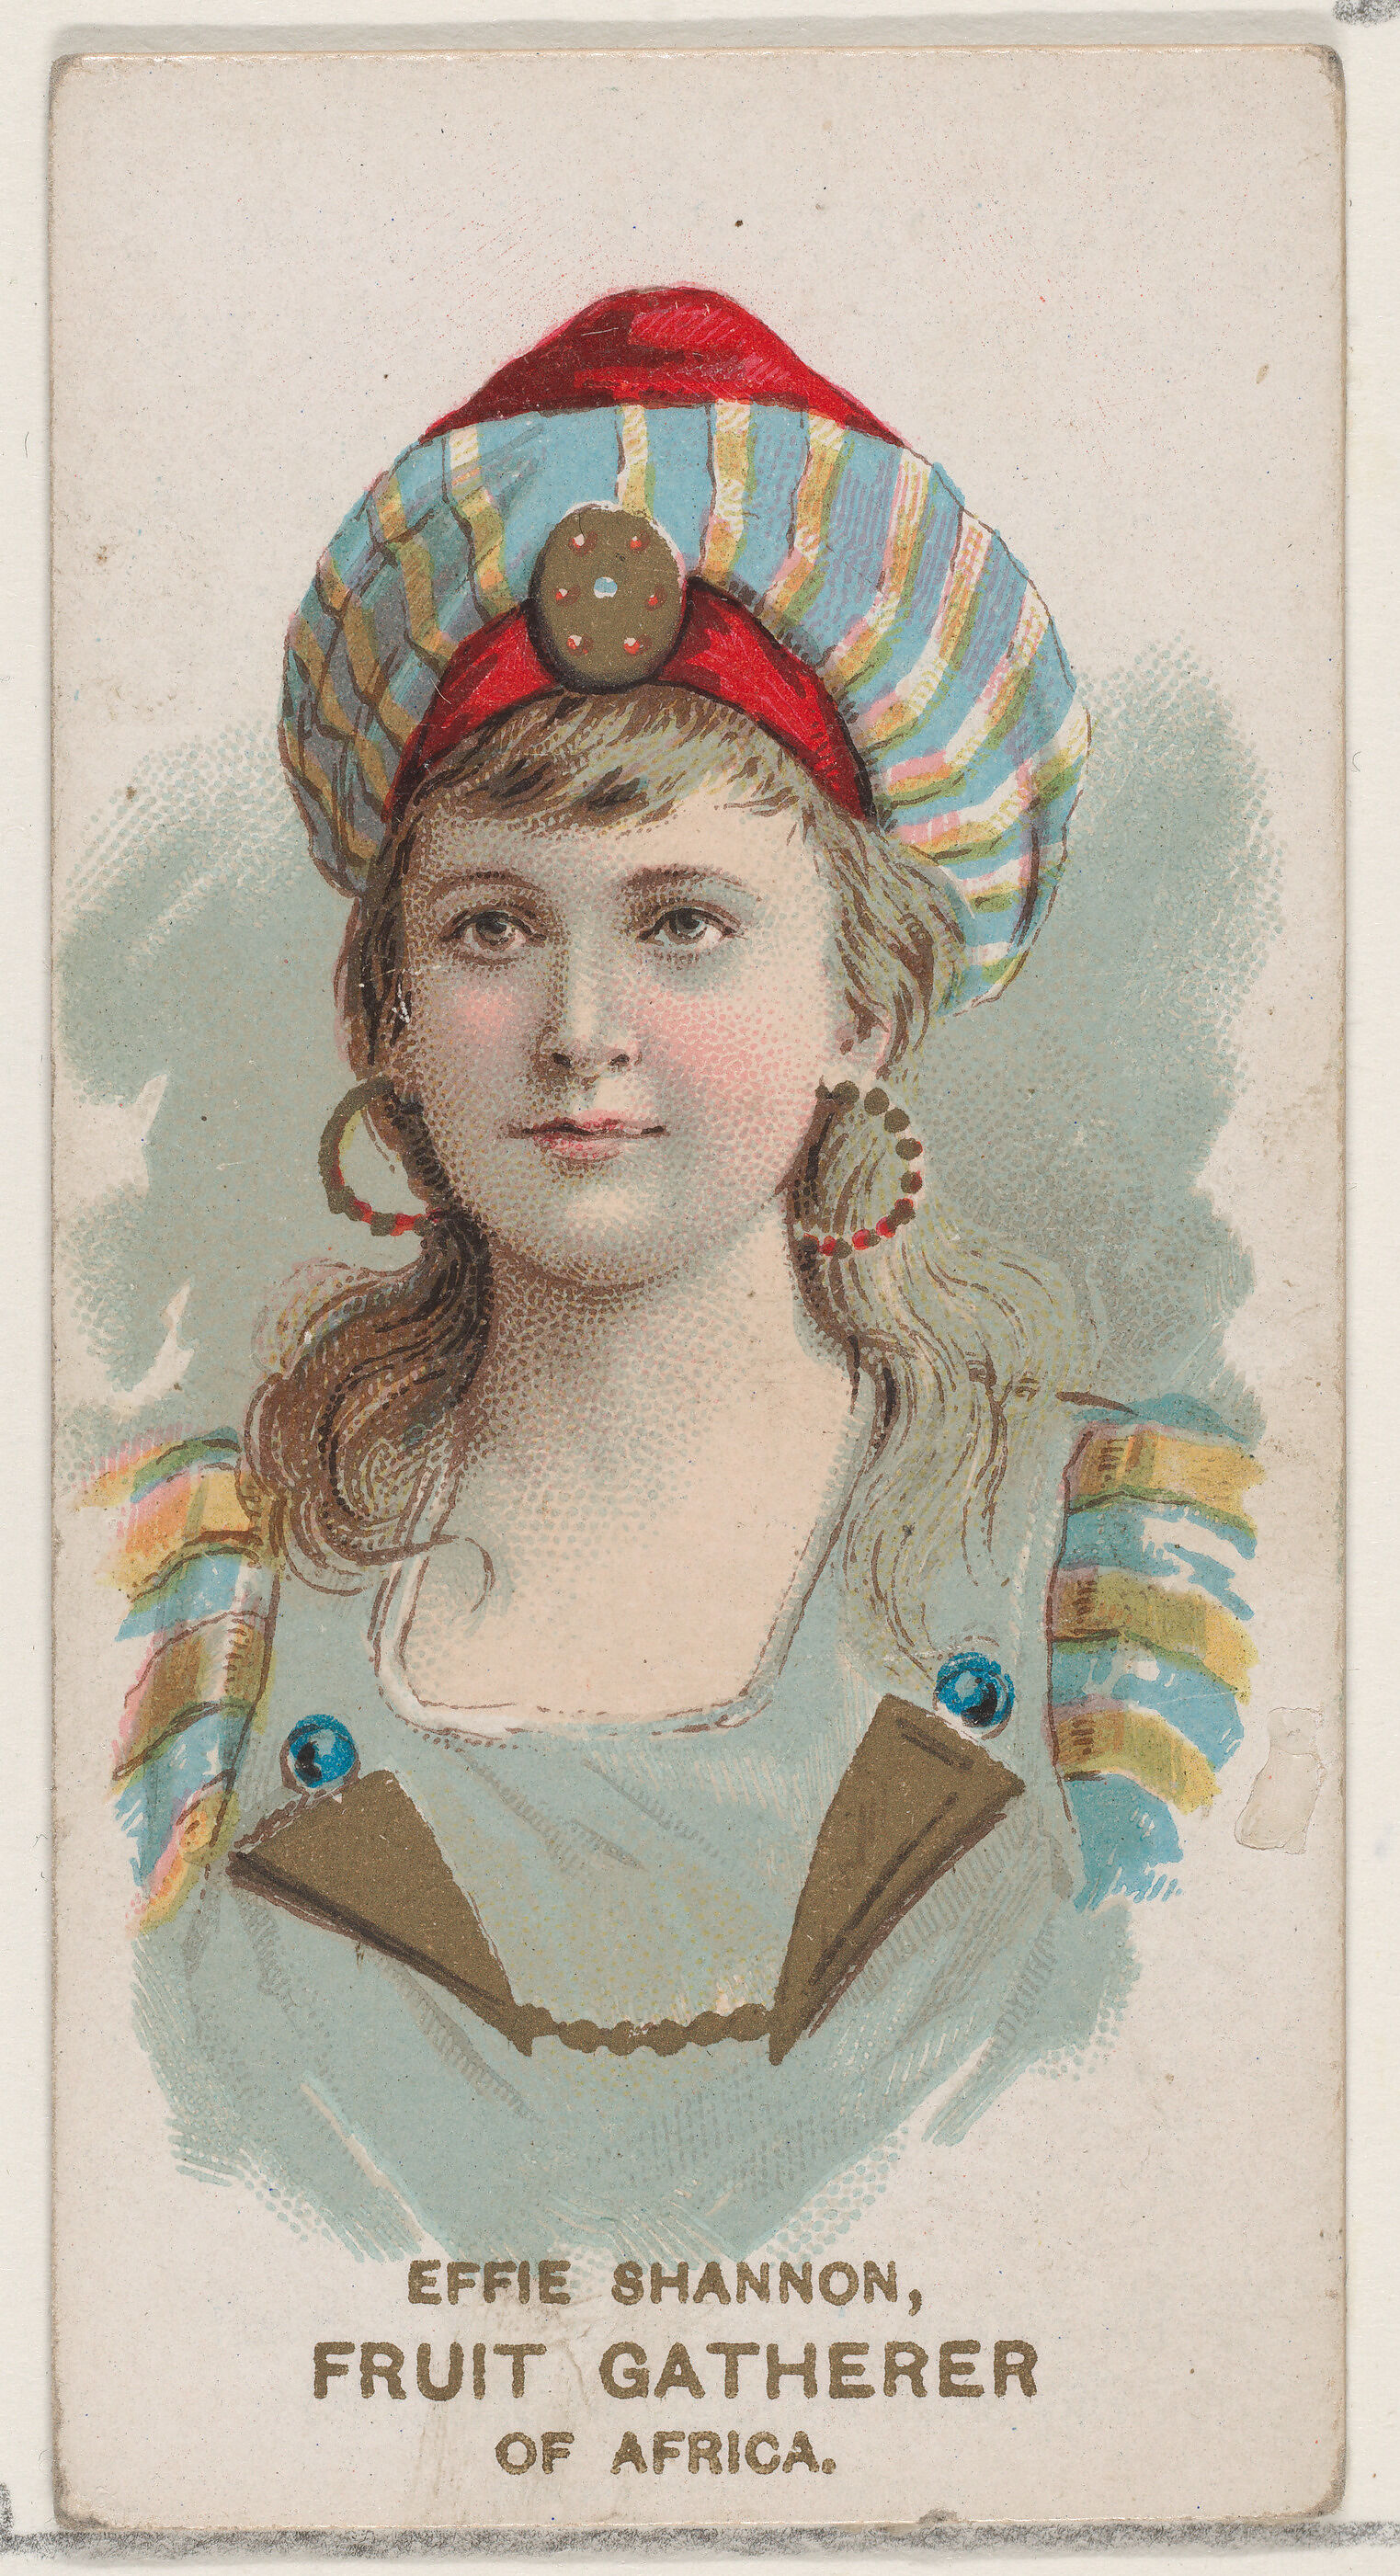 Effie Shannon Dressed as Fruit Gatherer of Africa, from the set Actors and Actresses, Second Series (N71) for Duke brand cigarettes, Issued by W. Duke, Sons &amp; Co. (New York and Durham, N.C.), Commercial color lithograph 